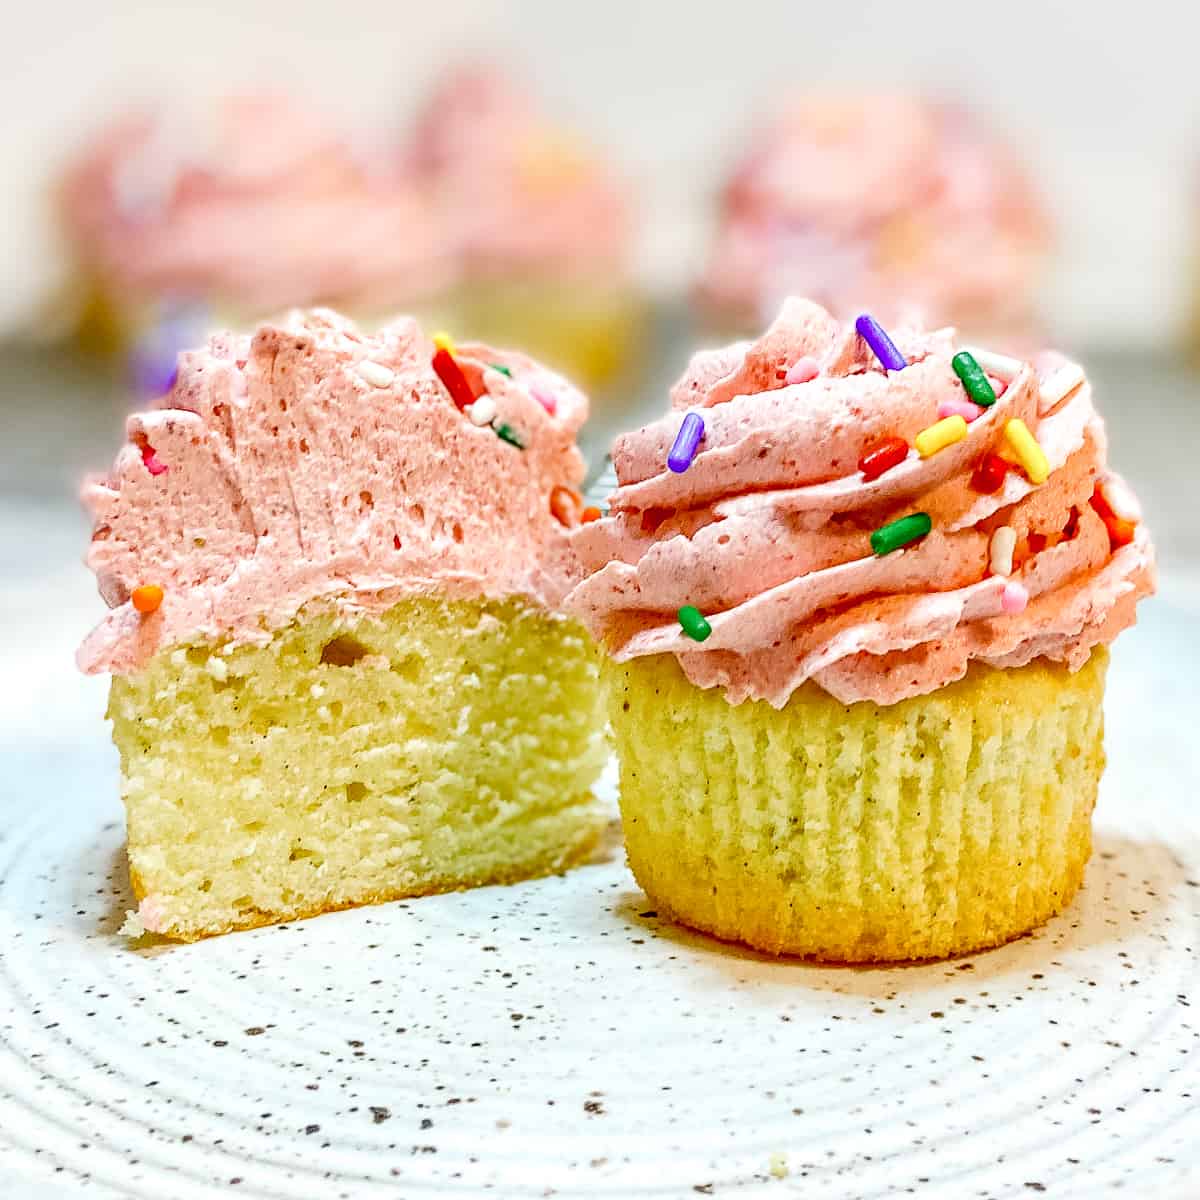 Vanilla cupcakes with strawberry frosting on a white plate.